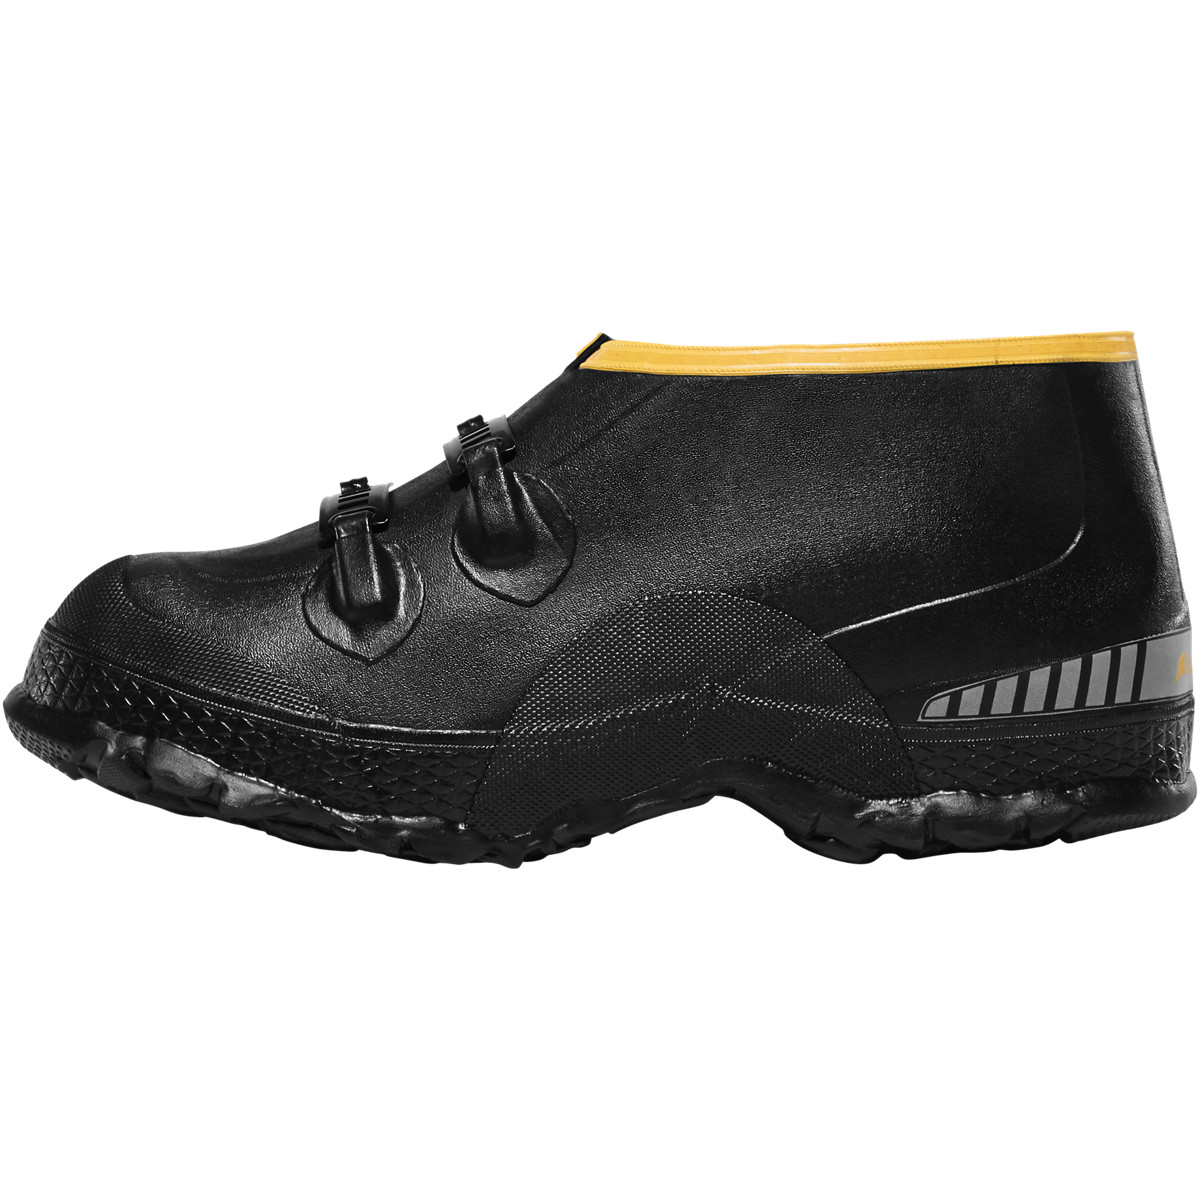 5 buckle overshoes for cowboy boots,Save up to 19%,www.ilcascinone.com